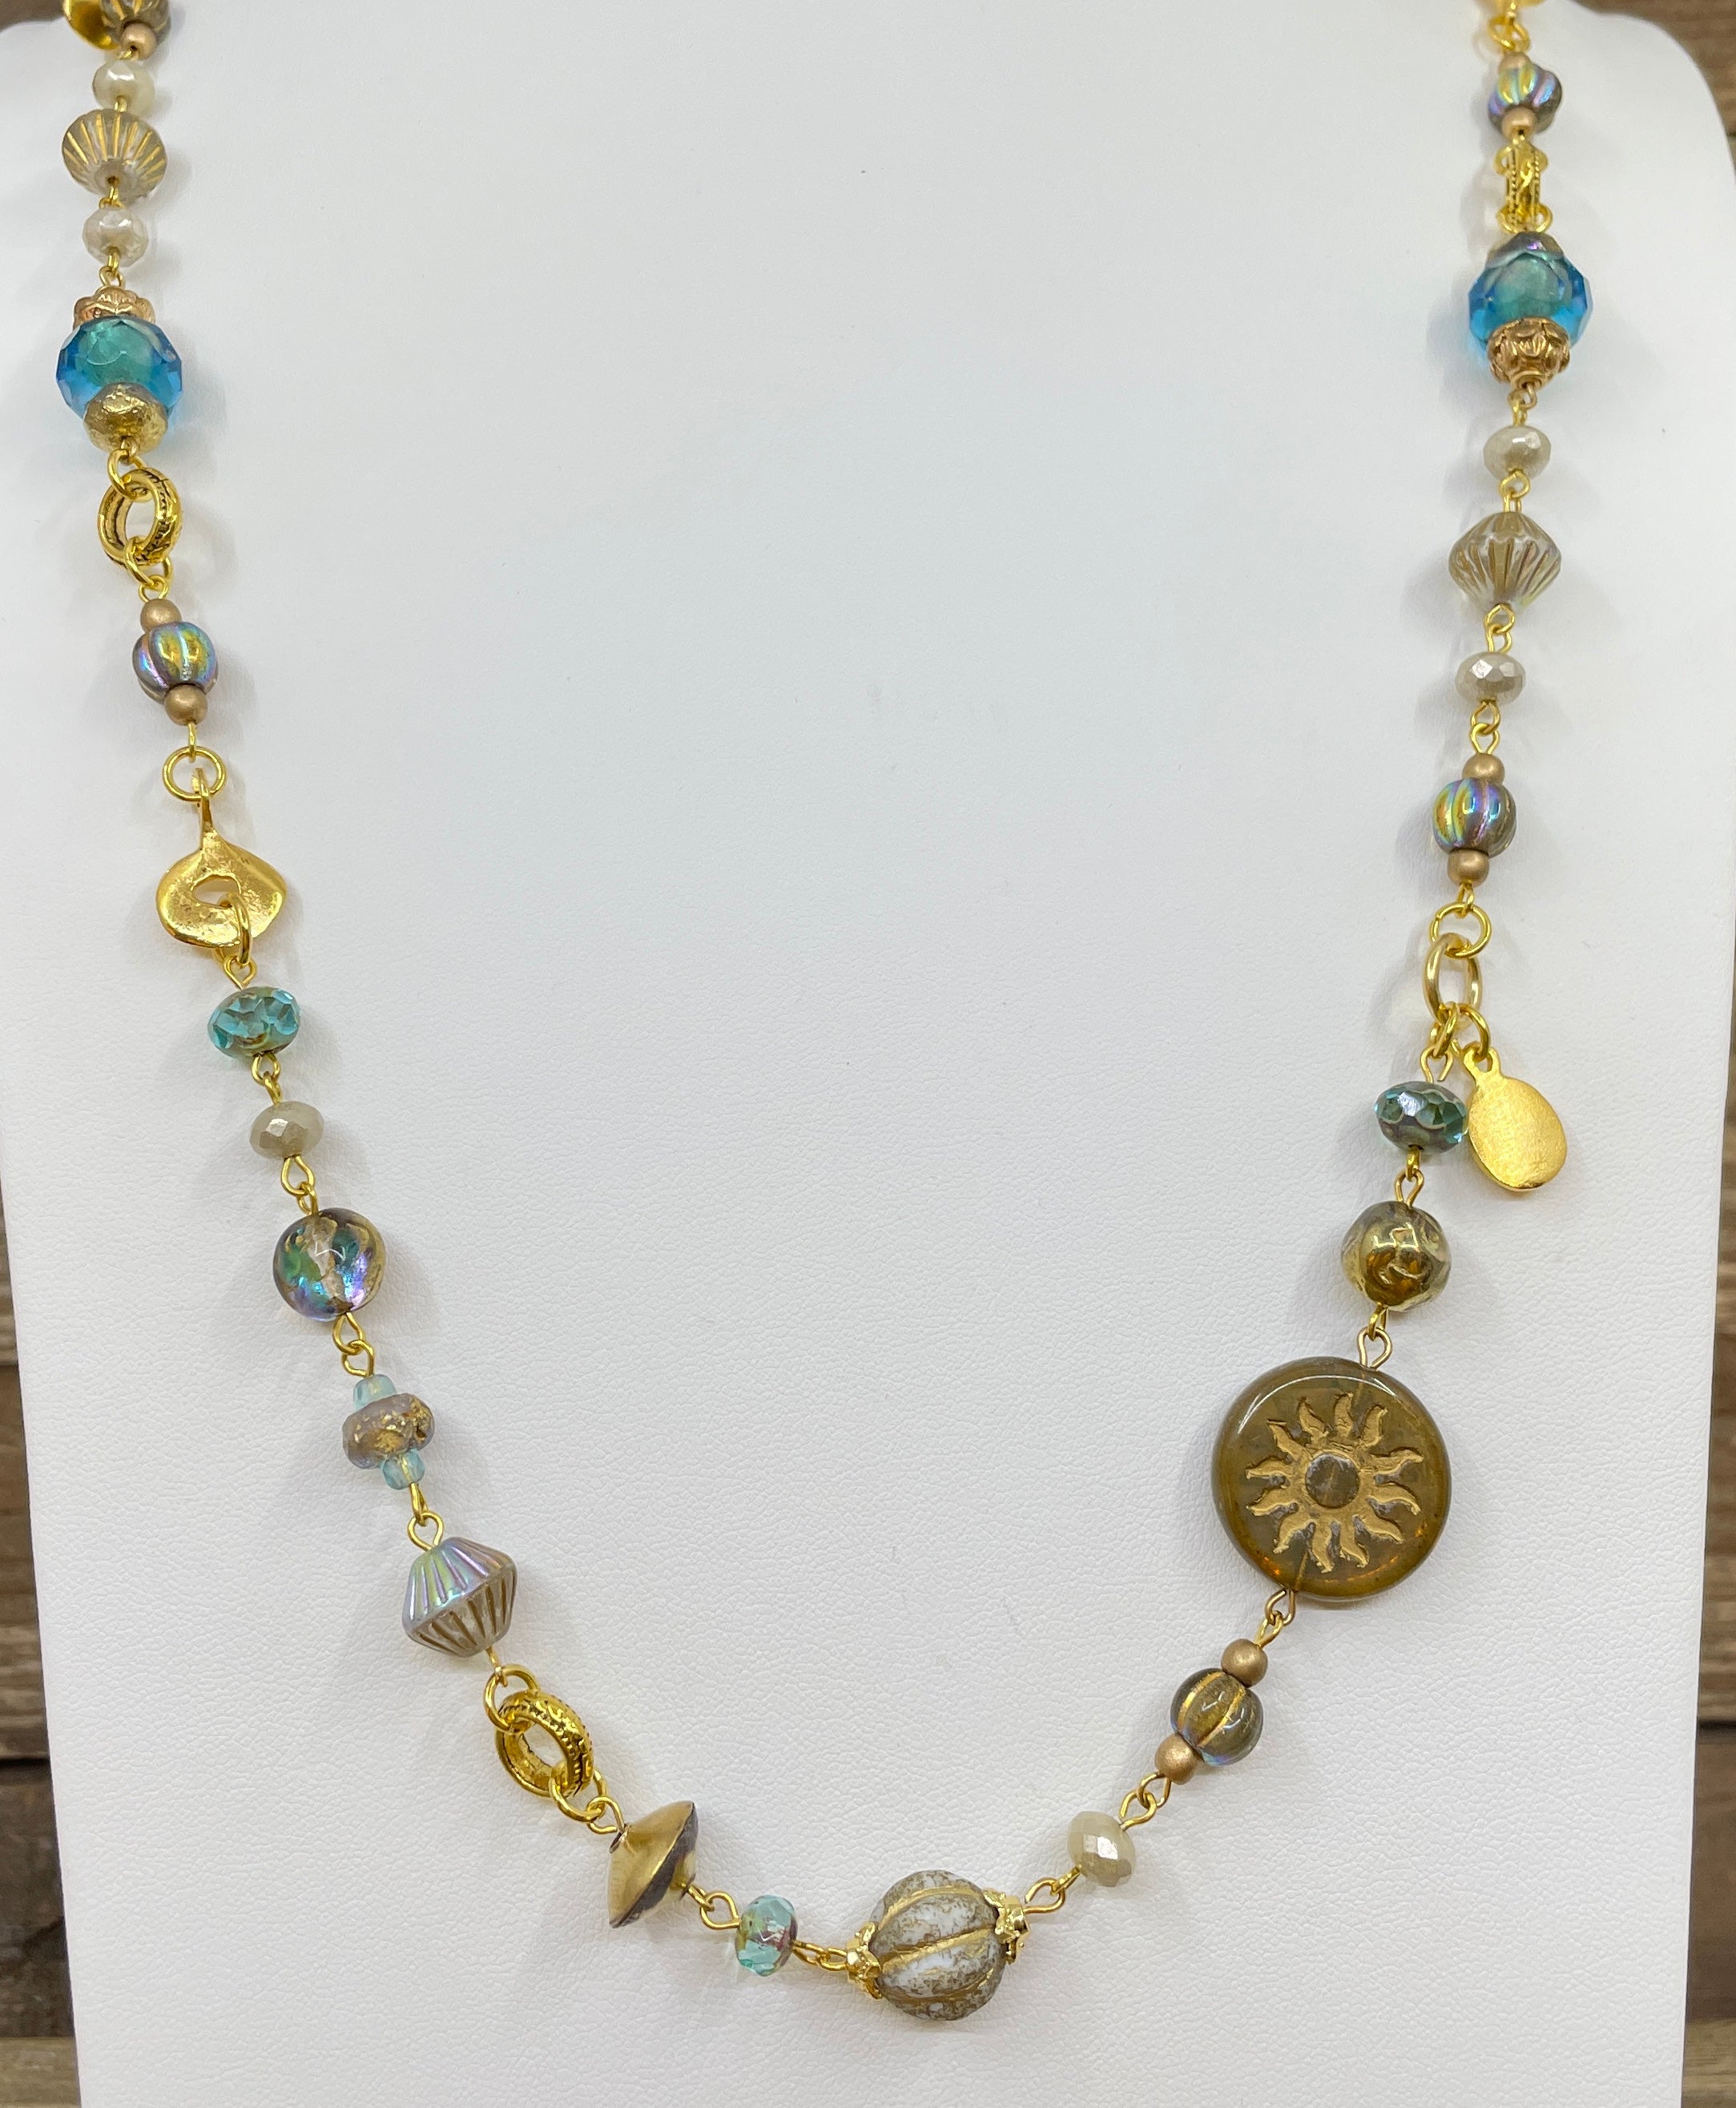 Vintage Czech Glass Beads & Gold Adornment Rosary Necklace